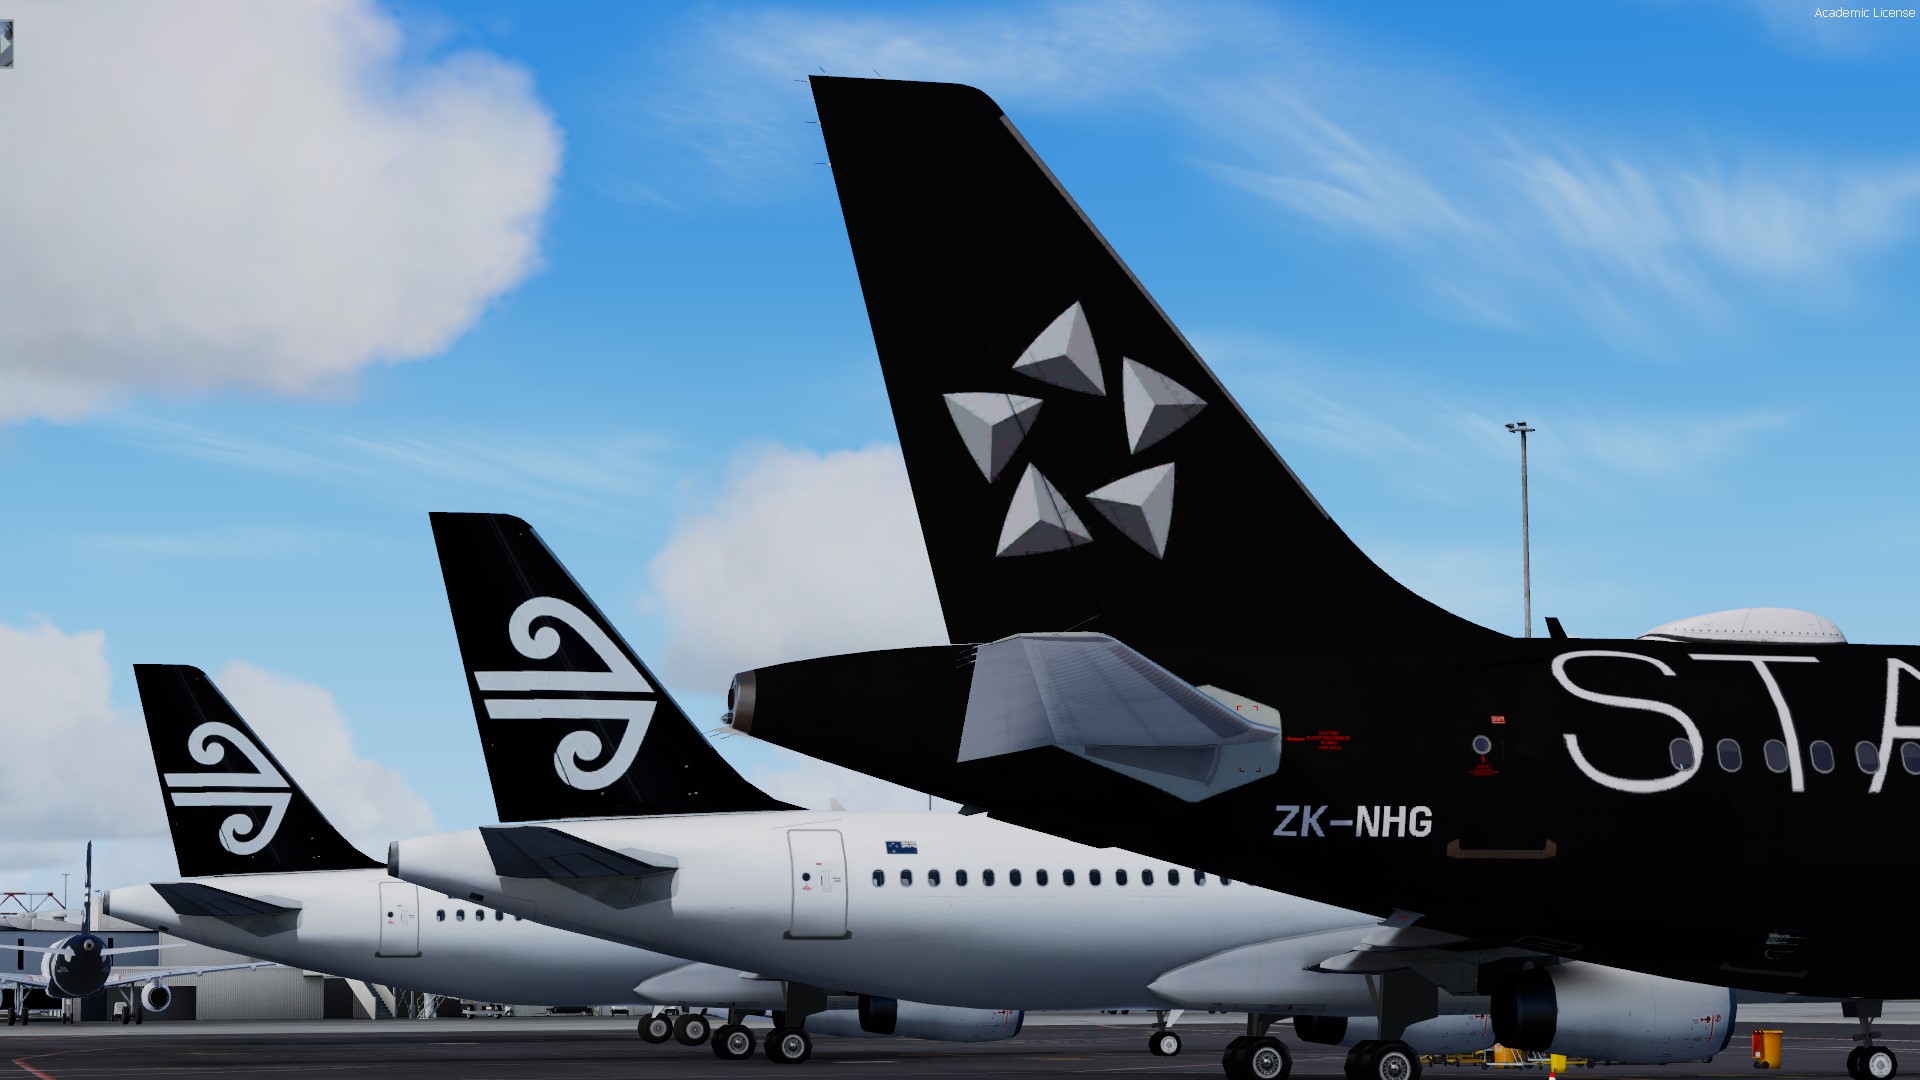 More information about "Air New Zealand Airbus A320-271N | ZK-NHG | All Black Star Alliance (Fictional)"